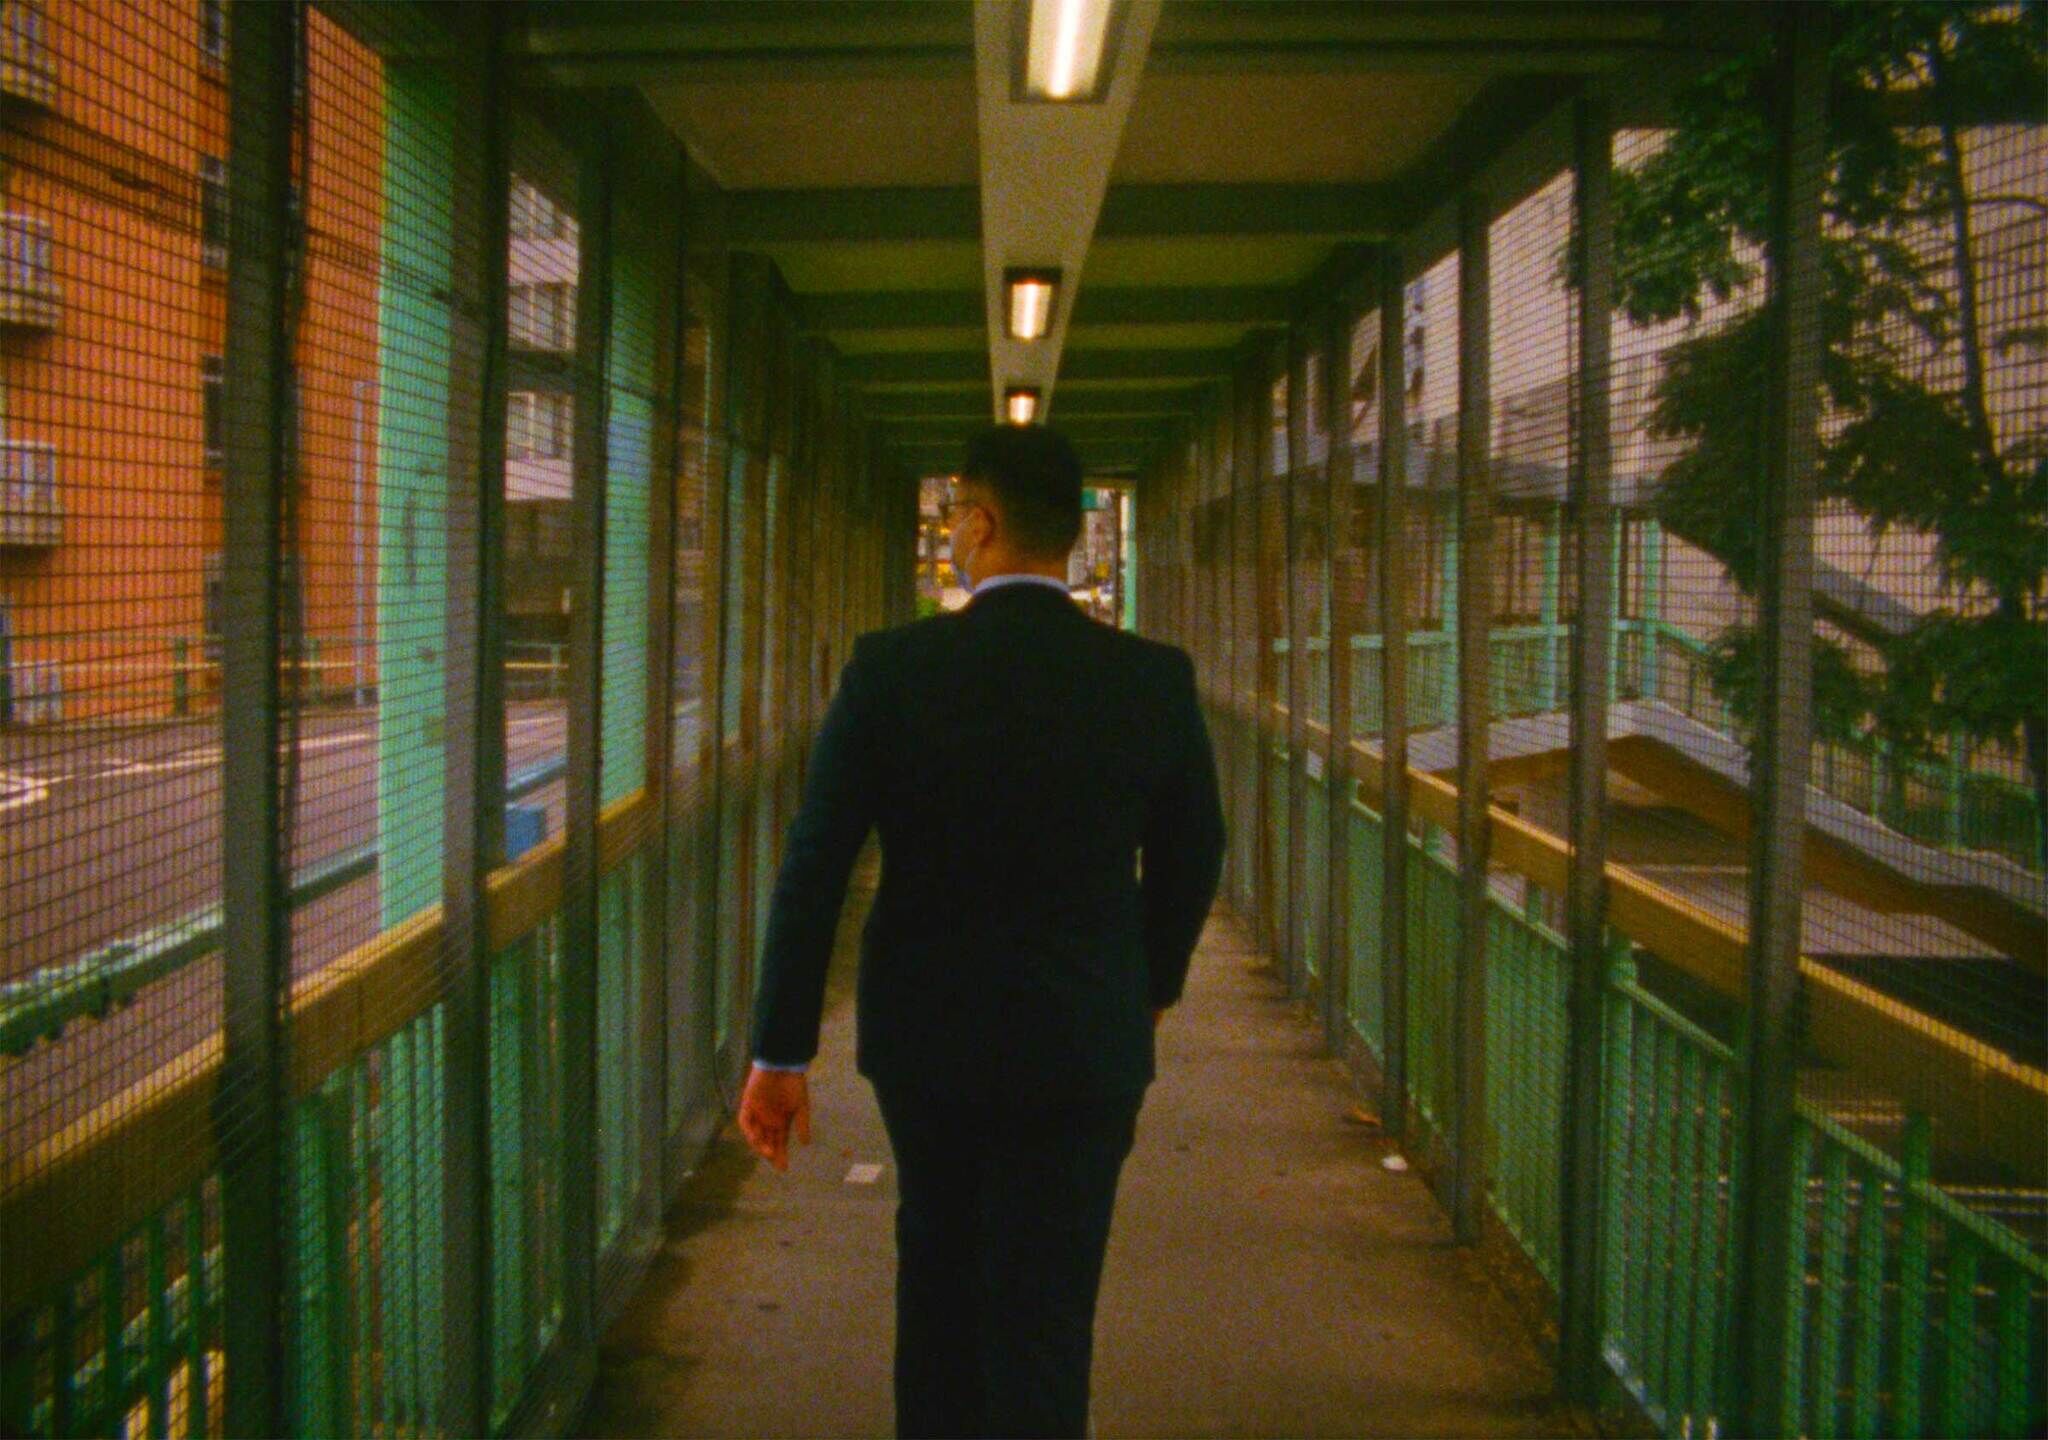 Man in suit walking down a covered pedestrian bridge with mesh walls and overhead lighting.